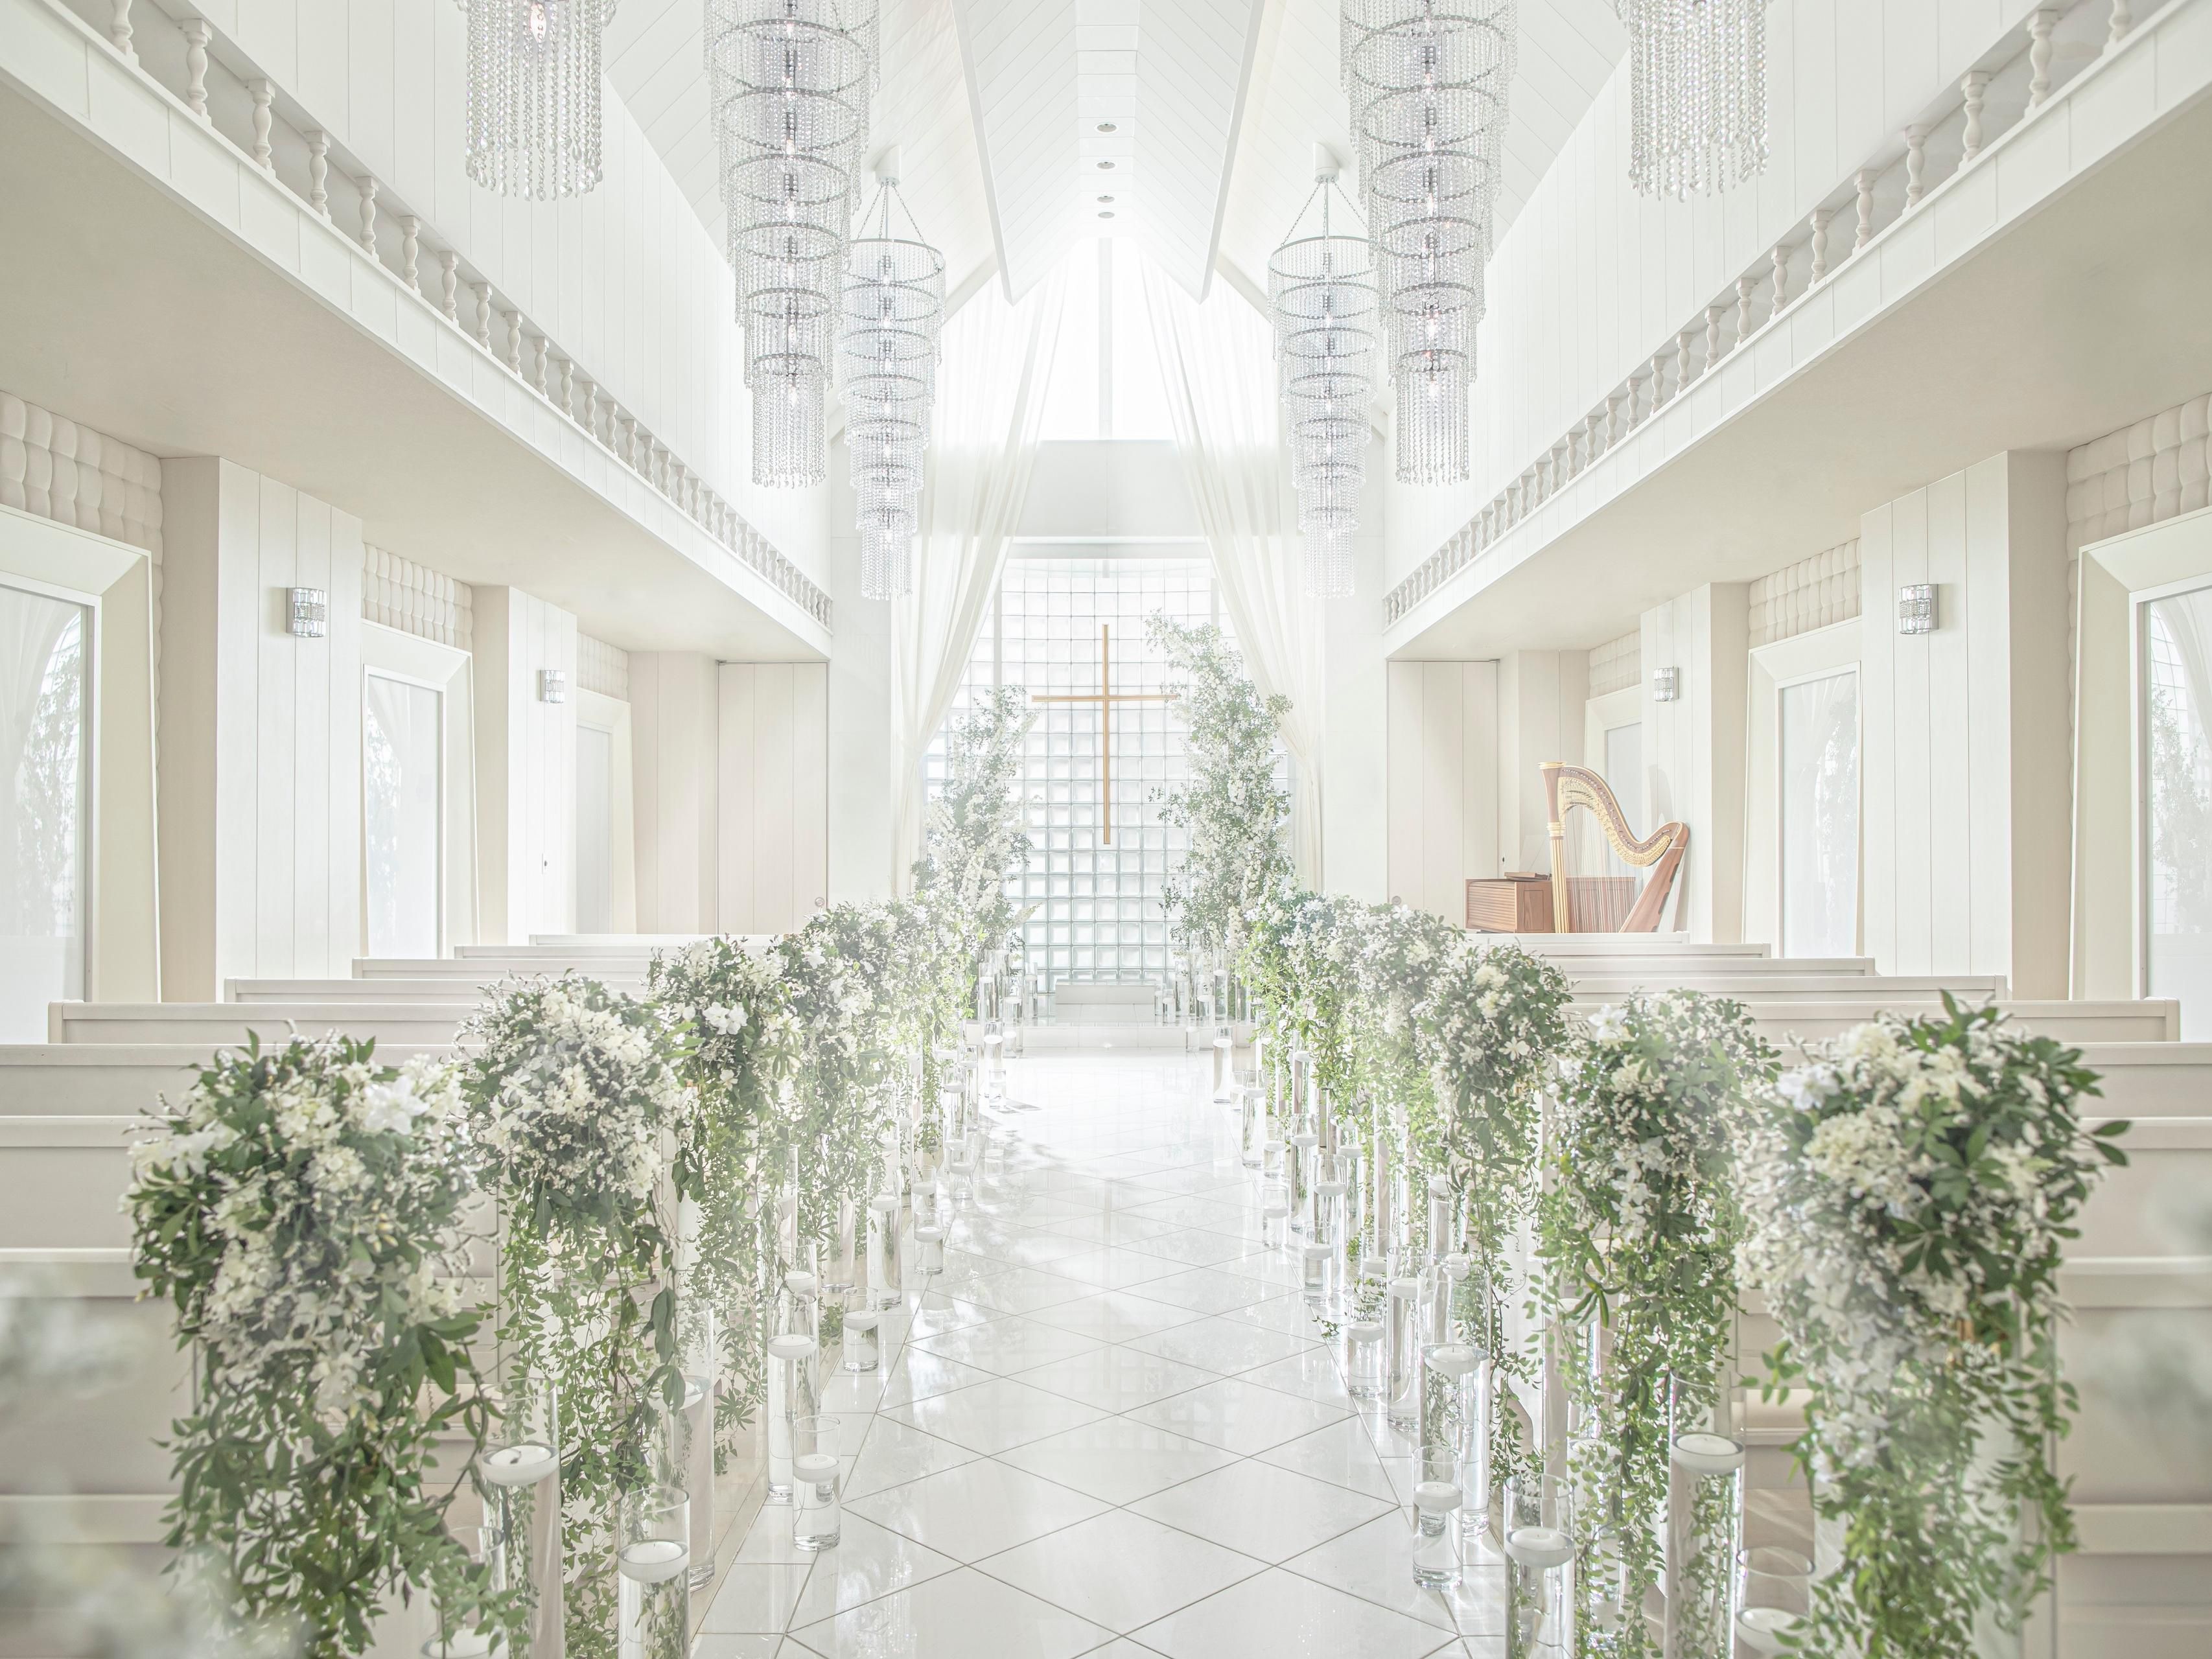 Celebrate your special day in the Chapel of Light. Your love will be strengthened as you are surrounded by the warm blessings of your families and friends within this impressive, light filled space. Enjoy the moment as you bask in the warm, natural light and Swarovski chandeliers twinkle to the sound of harp and cello.